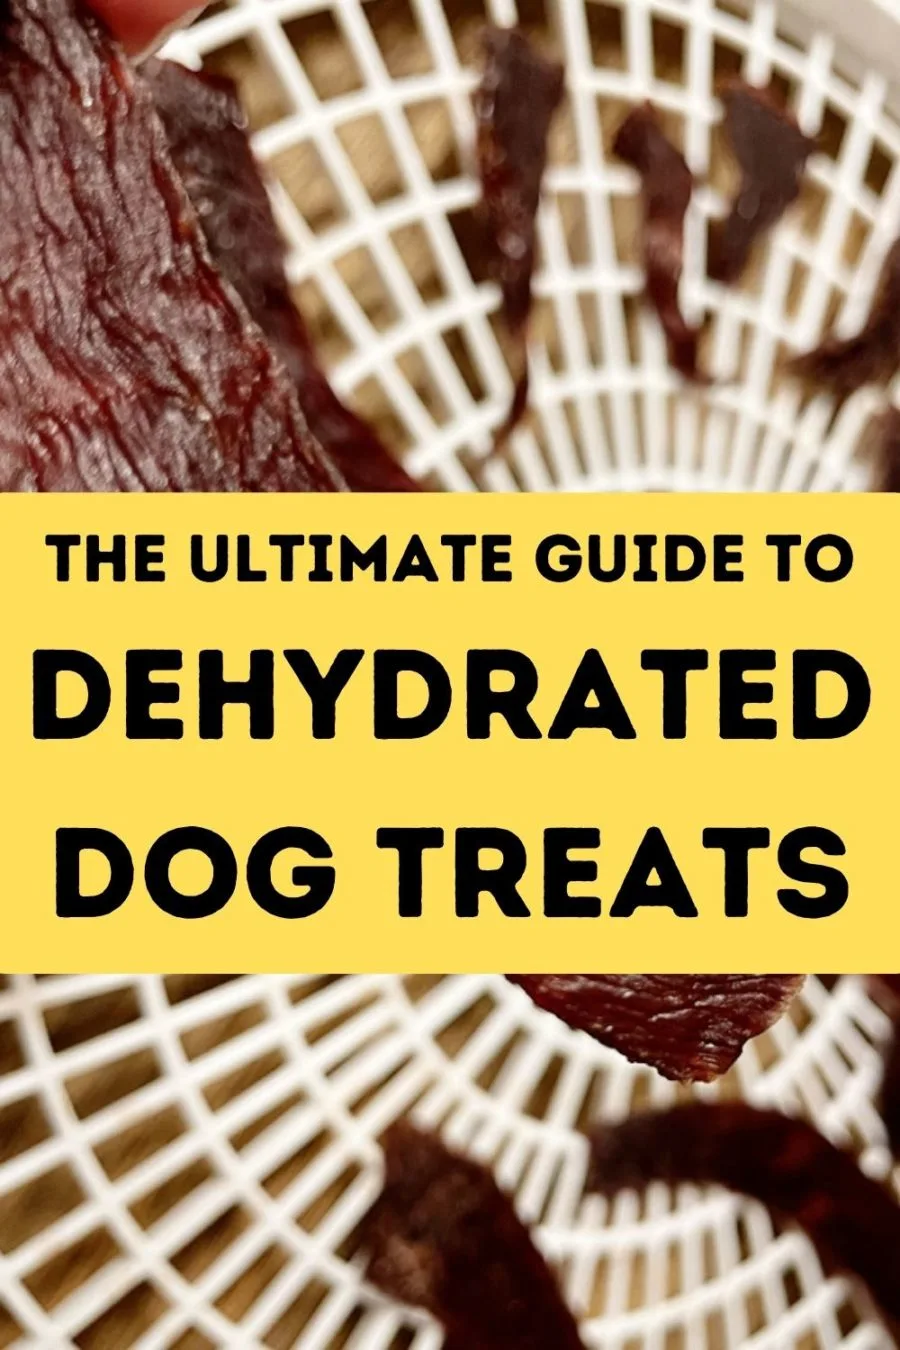 The Ultimate Guide to Making Dehydrated Dog Treats